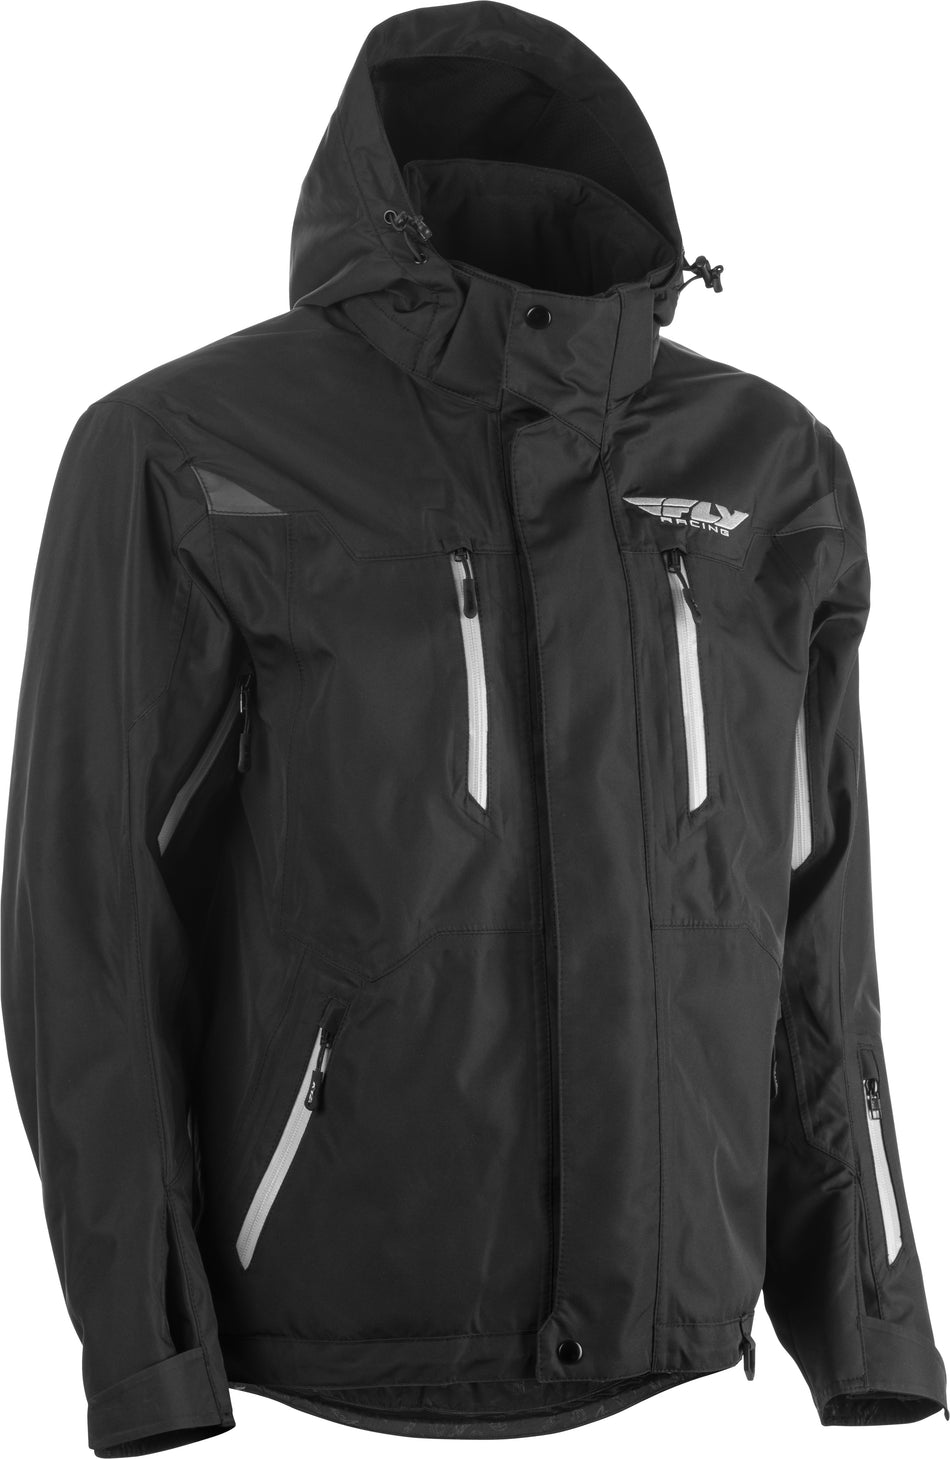 FLY RACING Fly Incline Jacket Black Lg 470-4100L